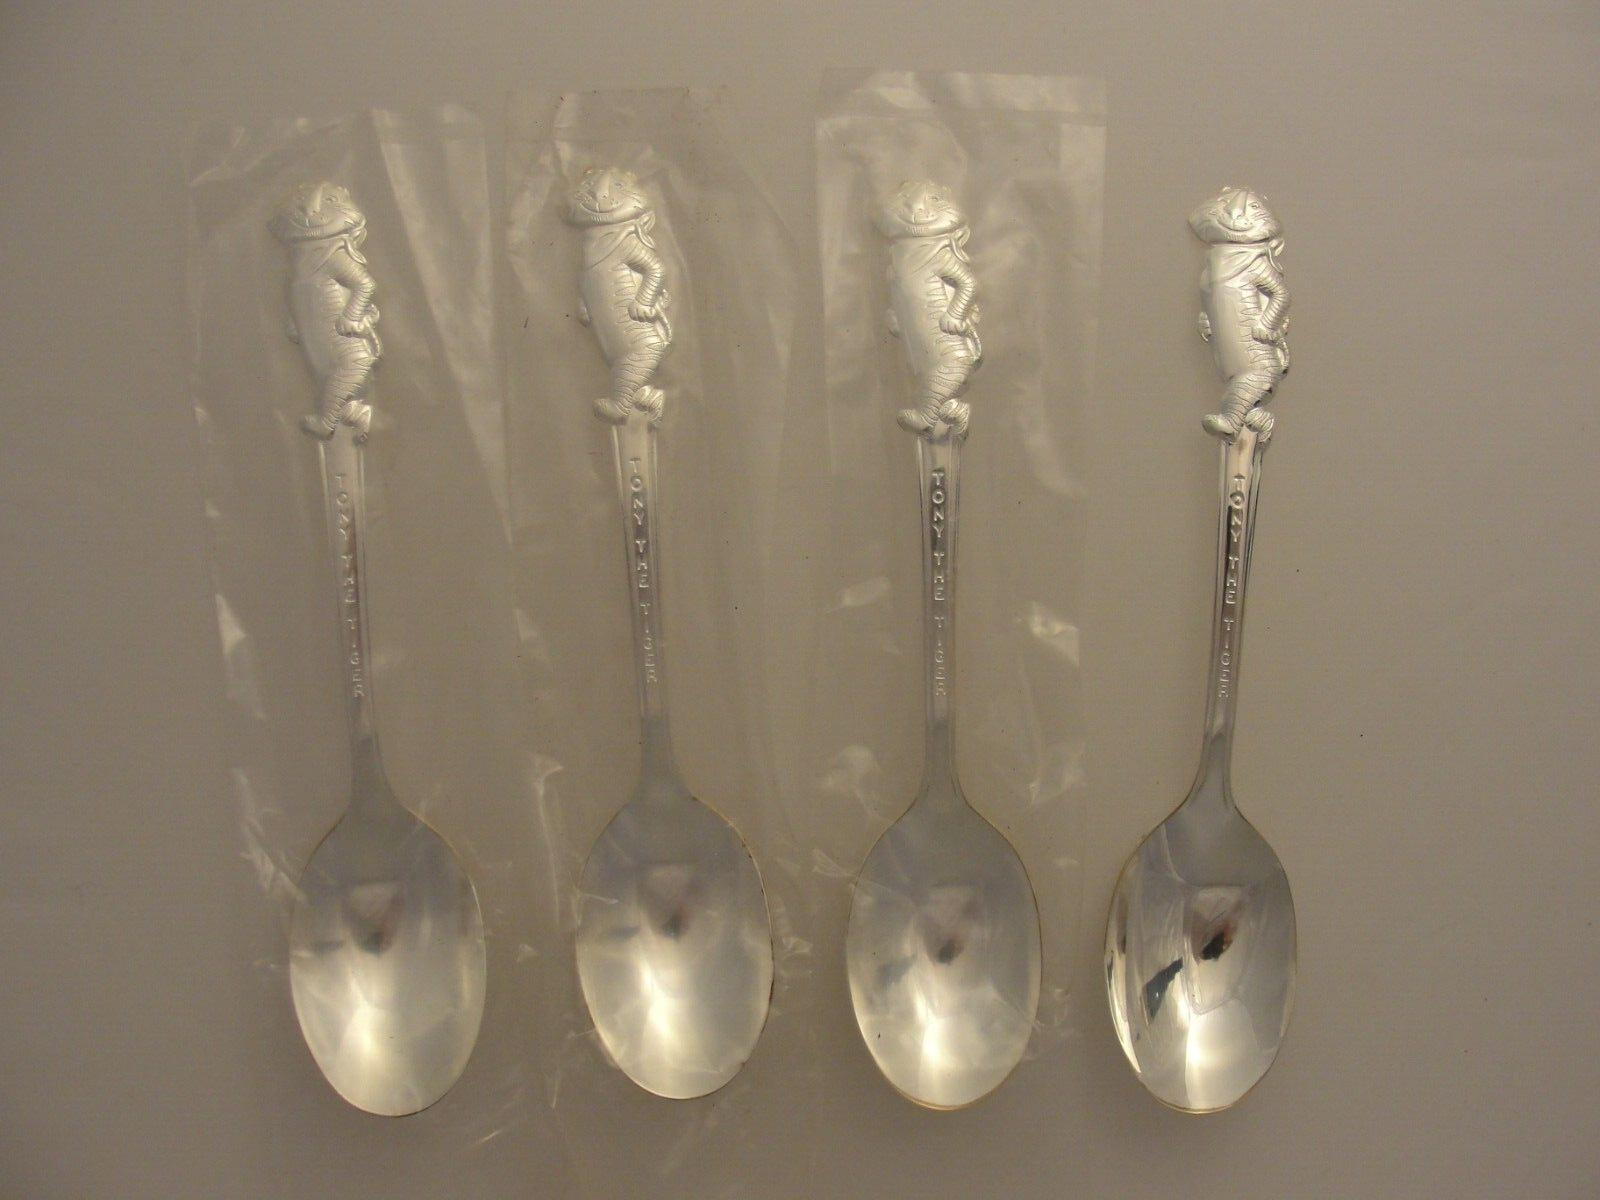 4 VTG KELLOGG TONY THE TIGER SILVER PLATE SPOONS 1965 NEW OLD STOCK  LOT * 91